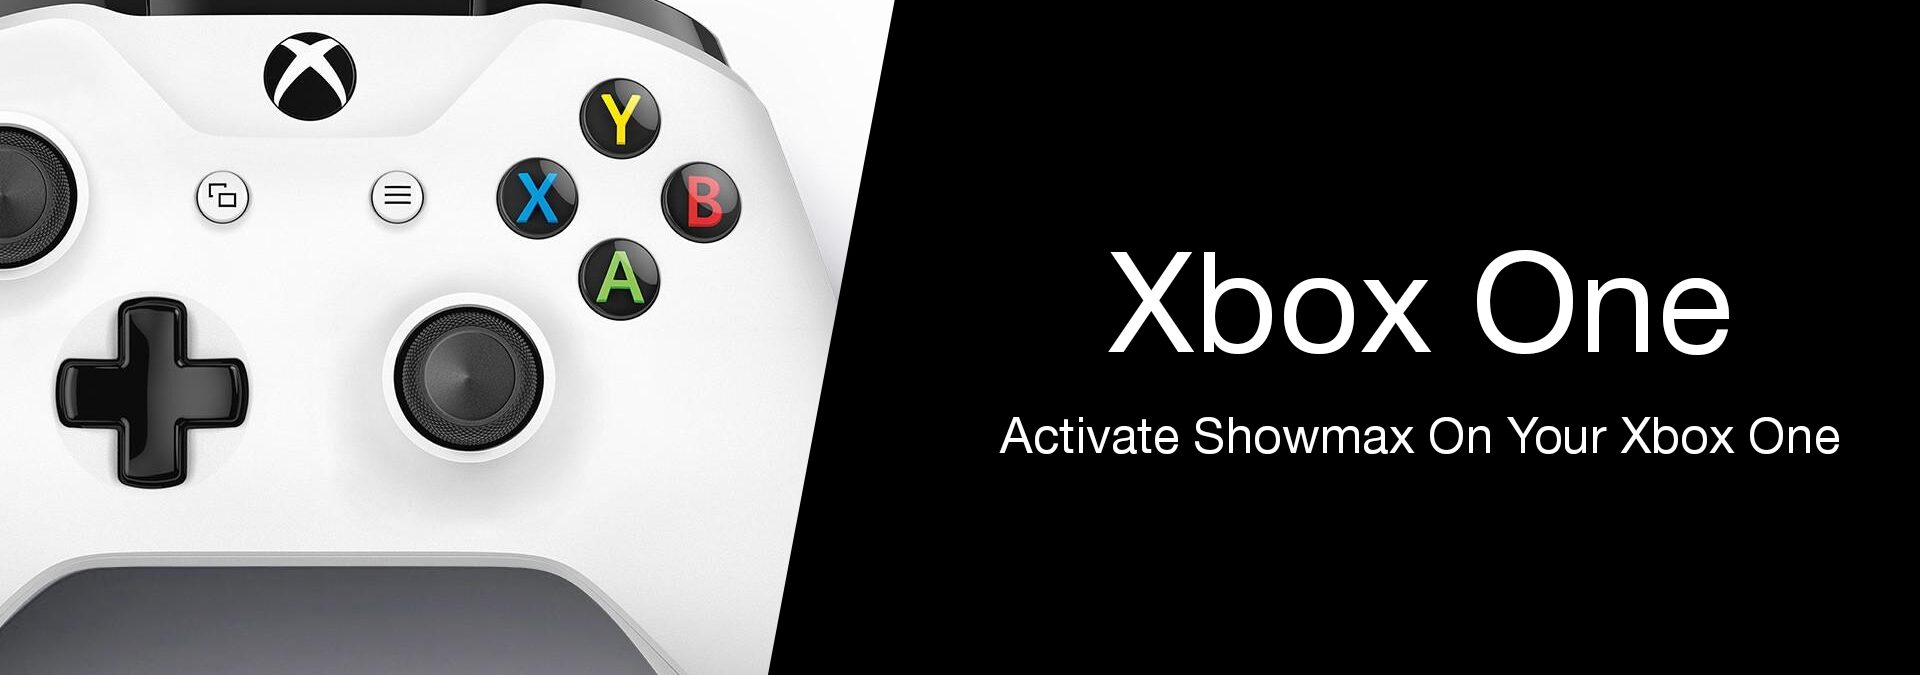 Activate Showmax on Xbox One